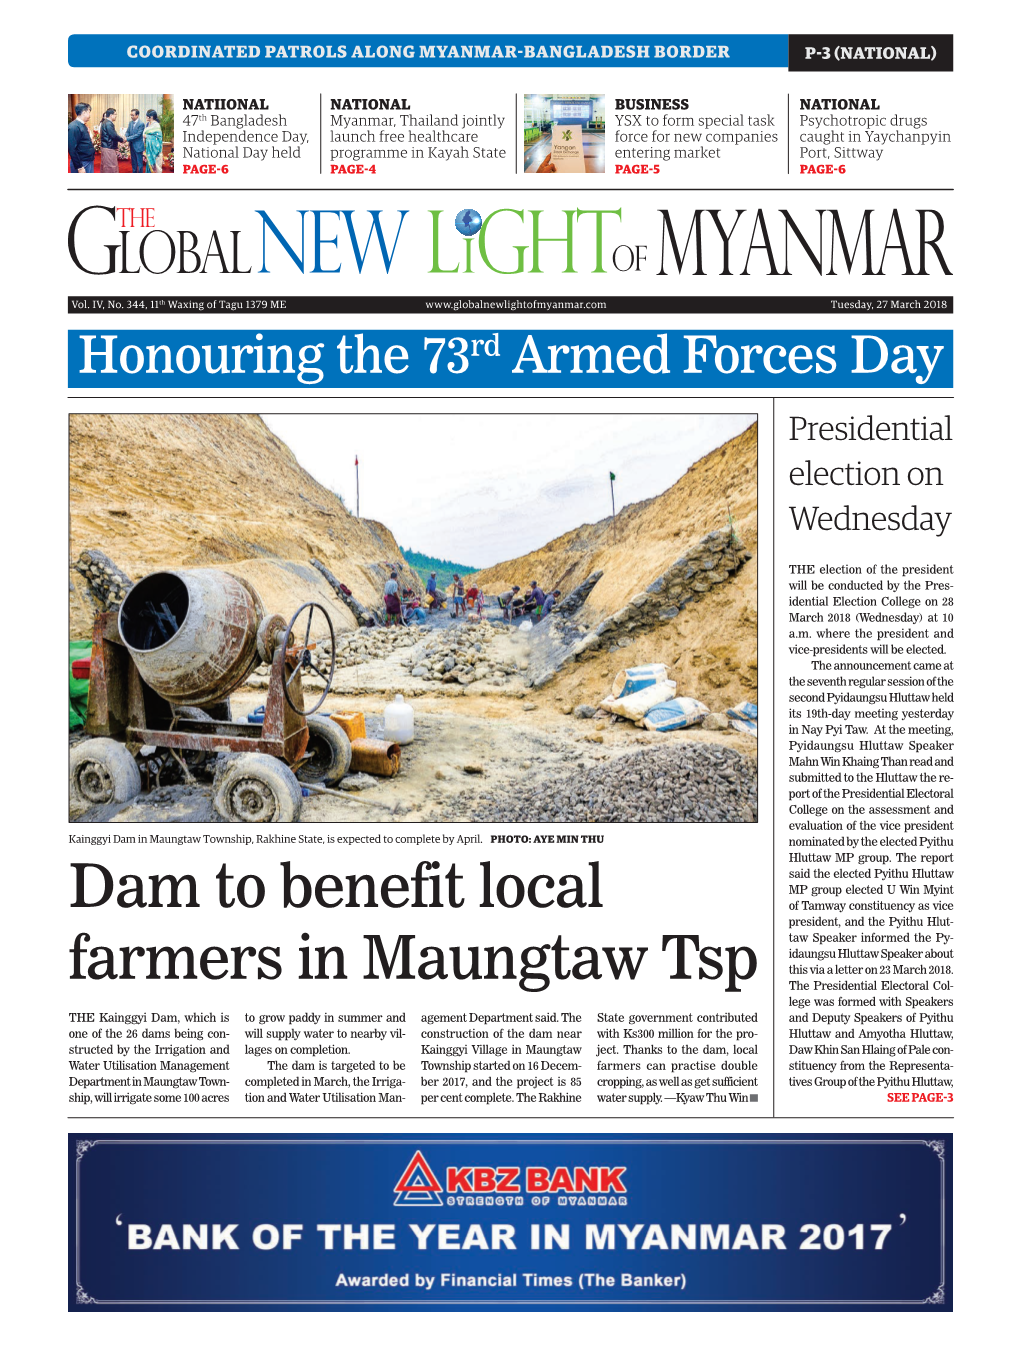 Dam to Benefit Local Farmers in Maungtaw